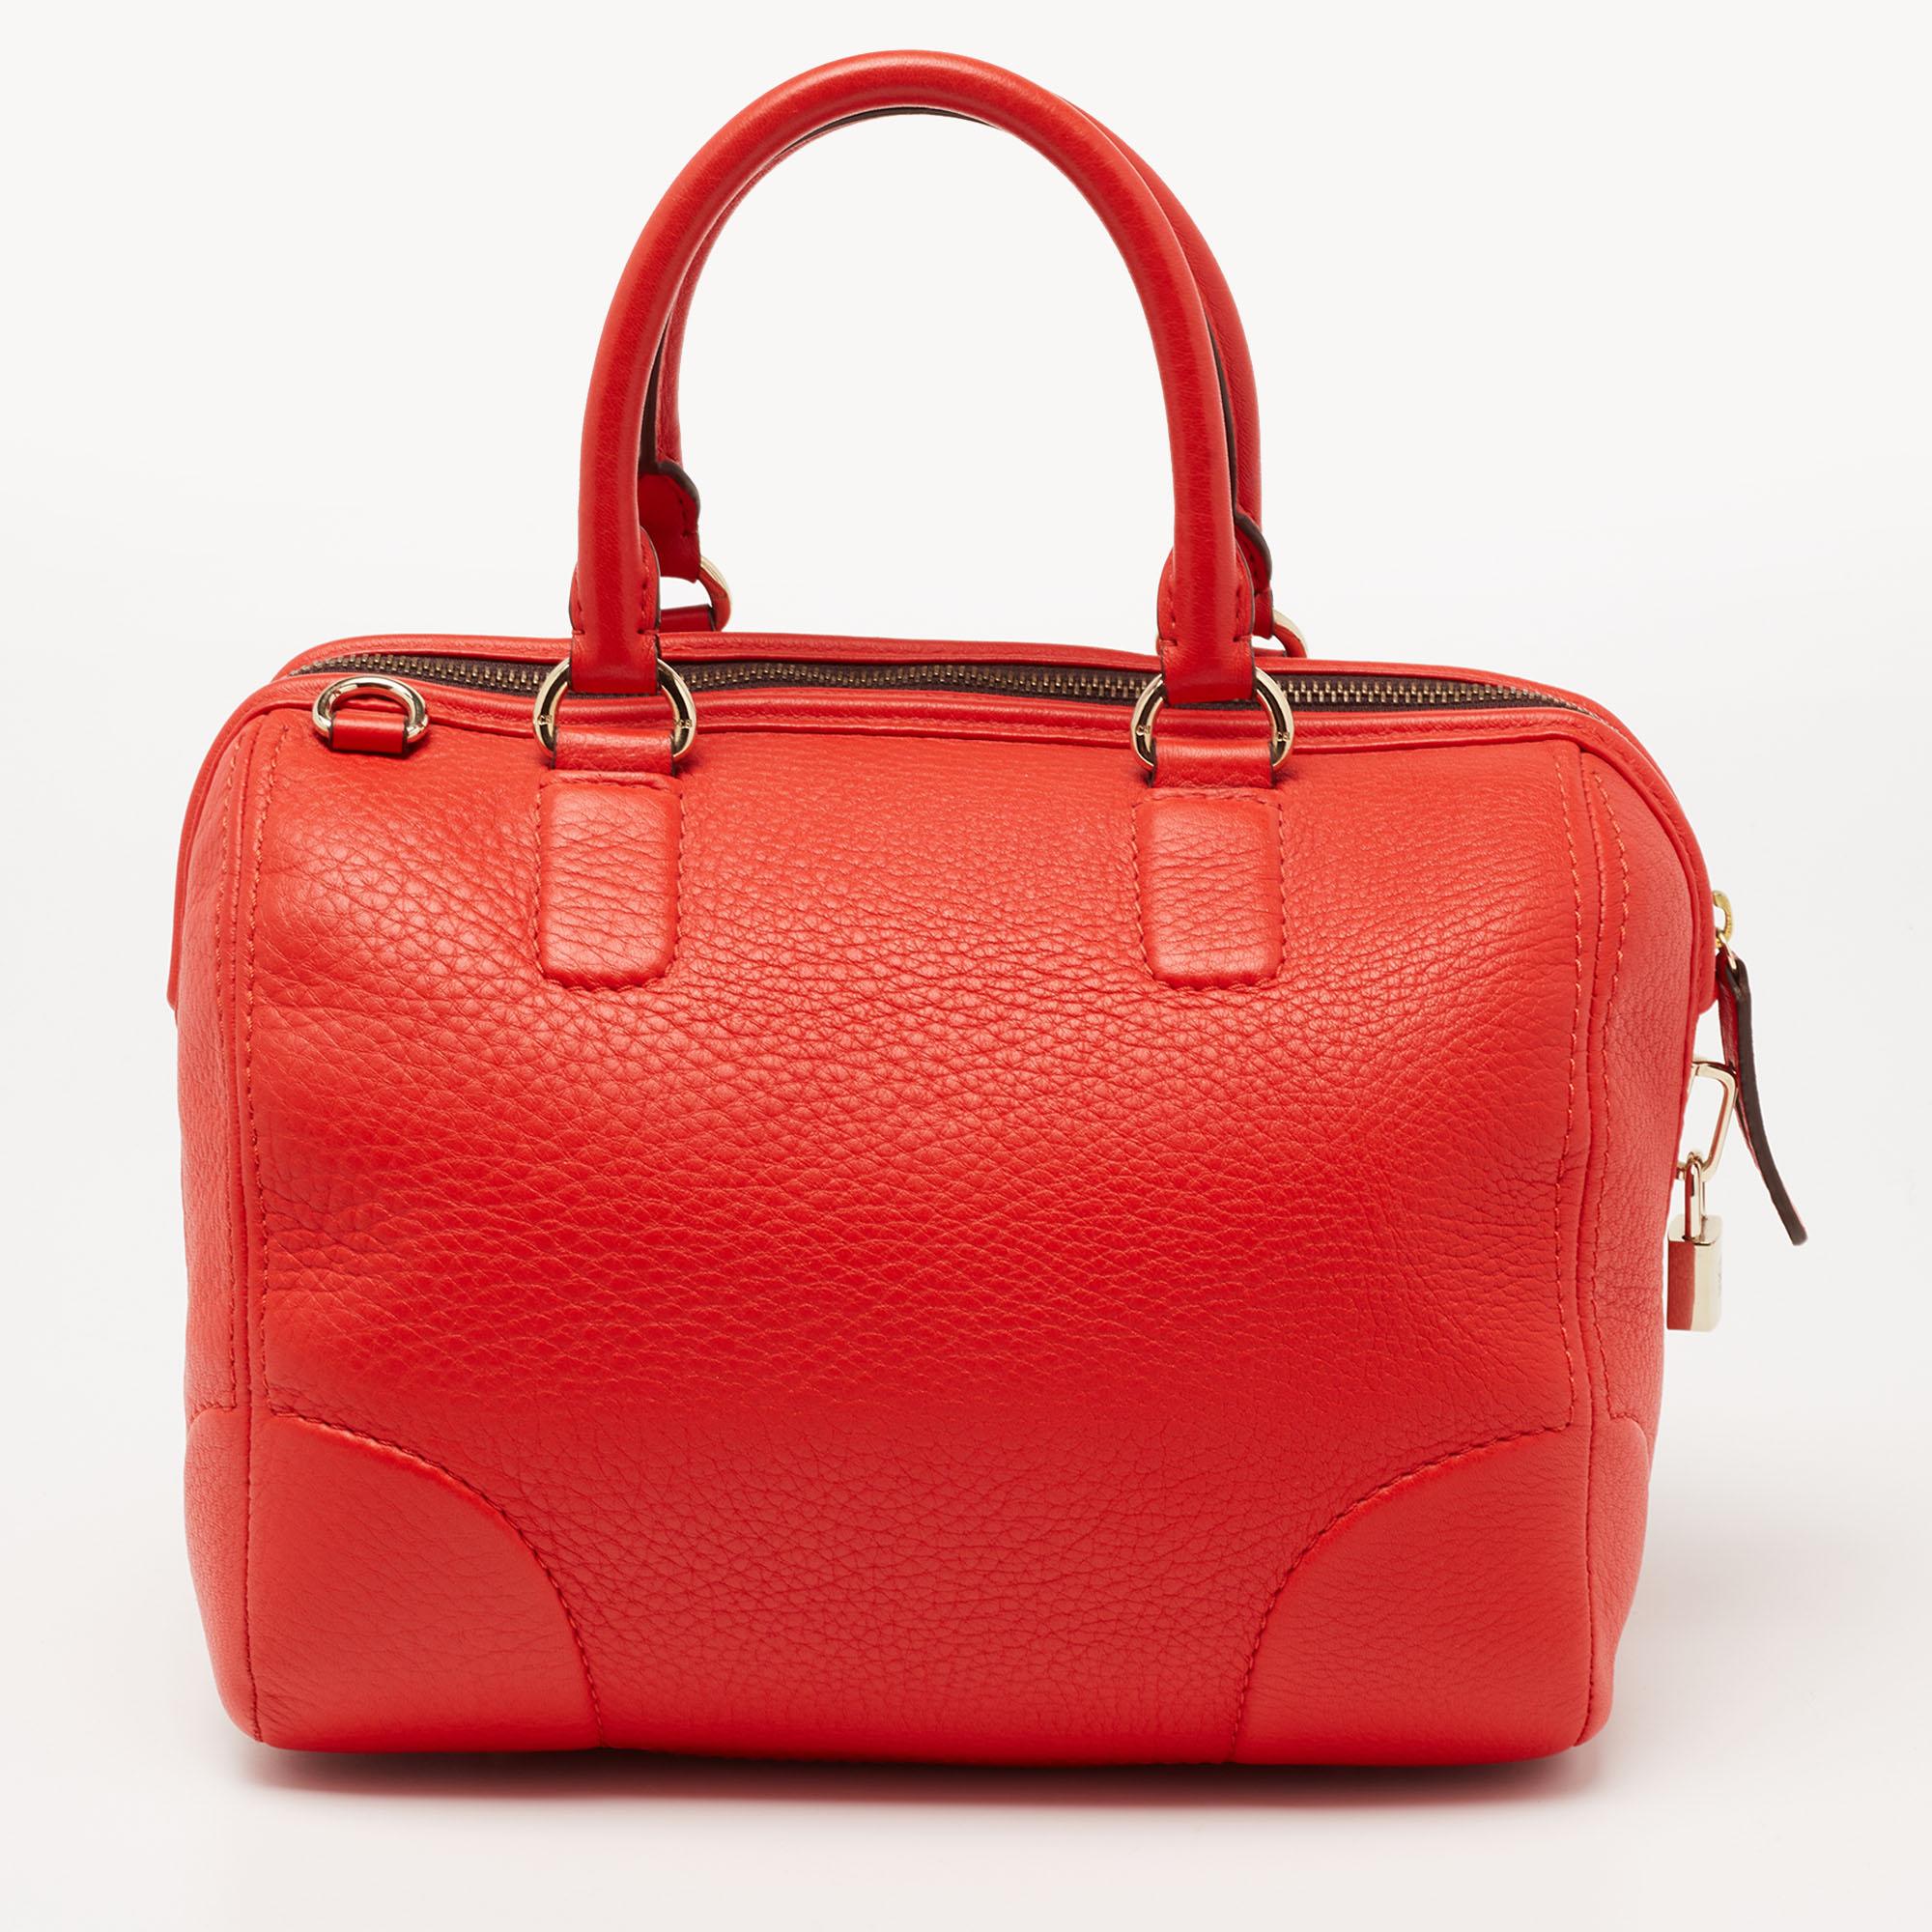 This CH Carolina Herrera bowler bag is contemporary and fresh. Crafted from orange leather, it flaunts the brand logo on the front. It can be carried using dual handles. The fabric-lined interior of this bag can dutifully hold all your